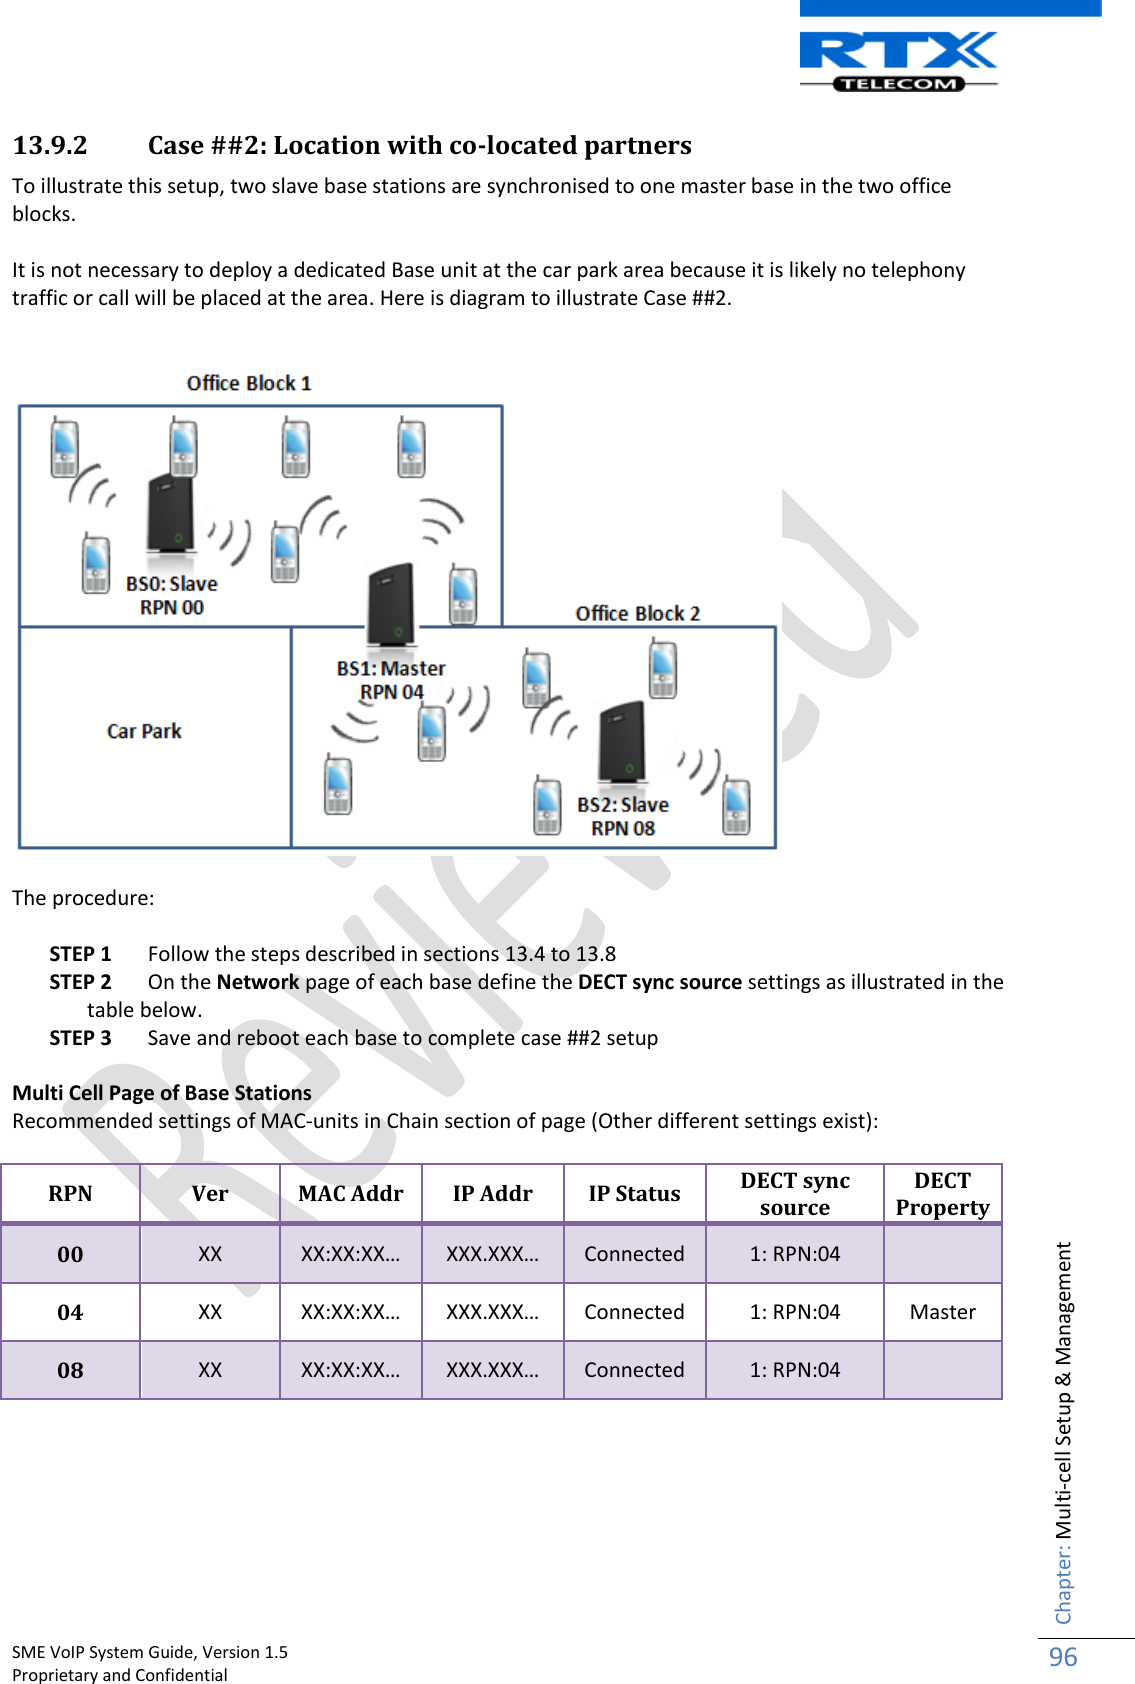    SME VoIP System Guide, Version 1.5                                                                                                                                                          Proprietary and Confidential    Chapter: Multi-cell Setup &amp; Management 96  13.9.2 Case ##2: Location with co-located partners  To illustrate this setup, two slave base stations are synchronised to one master base in the two office blocks.   It is not necessary to deploy a dedicated Base unit at the car park area because it is likely no telephony traffic or call will be placed at the area. Here is diagram to illustrate Case ##2.     The procedure:  STEP 1 Follow the steps described in sections 13.4 to 13.8 STEP 2 On the Network page of each base define the DECT sync source settings as illustrated in the table below. STEP 3 Save and reboot each base to complete case ##2 setup  Multi Cell Page of Base Stations Recommended settings of MAC-units in Chain section of page (Other different settings exist):  RPN Ver MAC Addr IP Addr IP Status DECT sync source DECT Property 00 XX XX:XX:XX… XXX.XXX… Connected 1: RPN:04  04 XX XX:XX:XX… XXX.XXX… Connected 1: RPN:04 Master 08 XX XX:XX:XX… XXX.XXX… Connected 1: RPN:04        